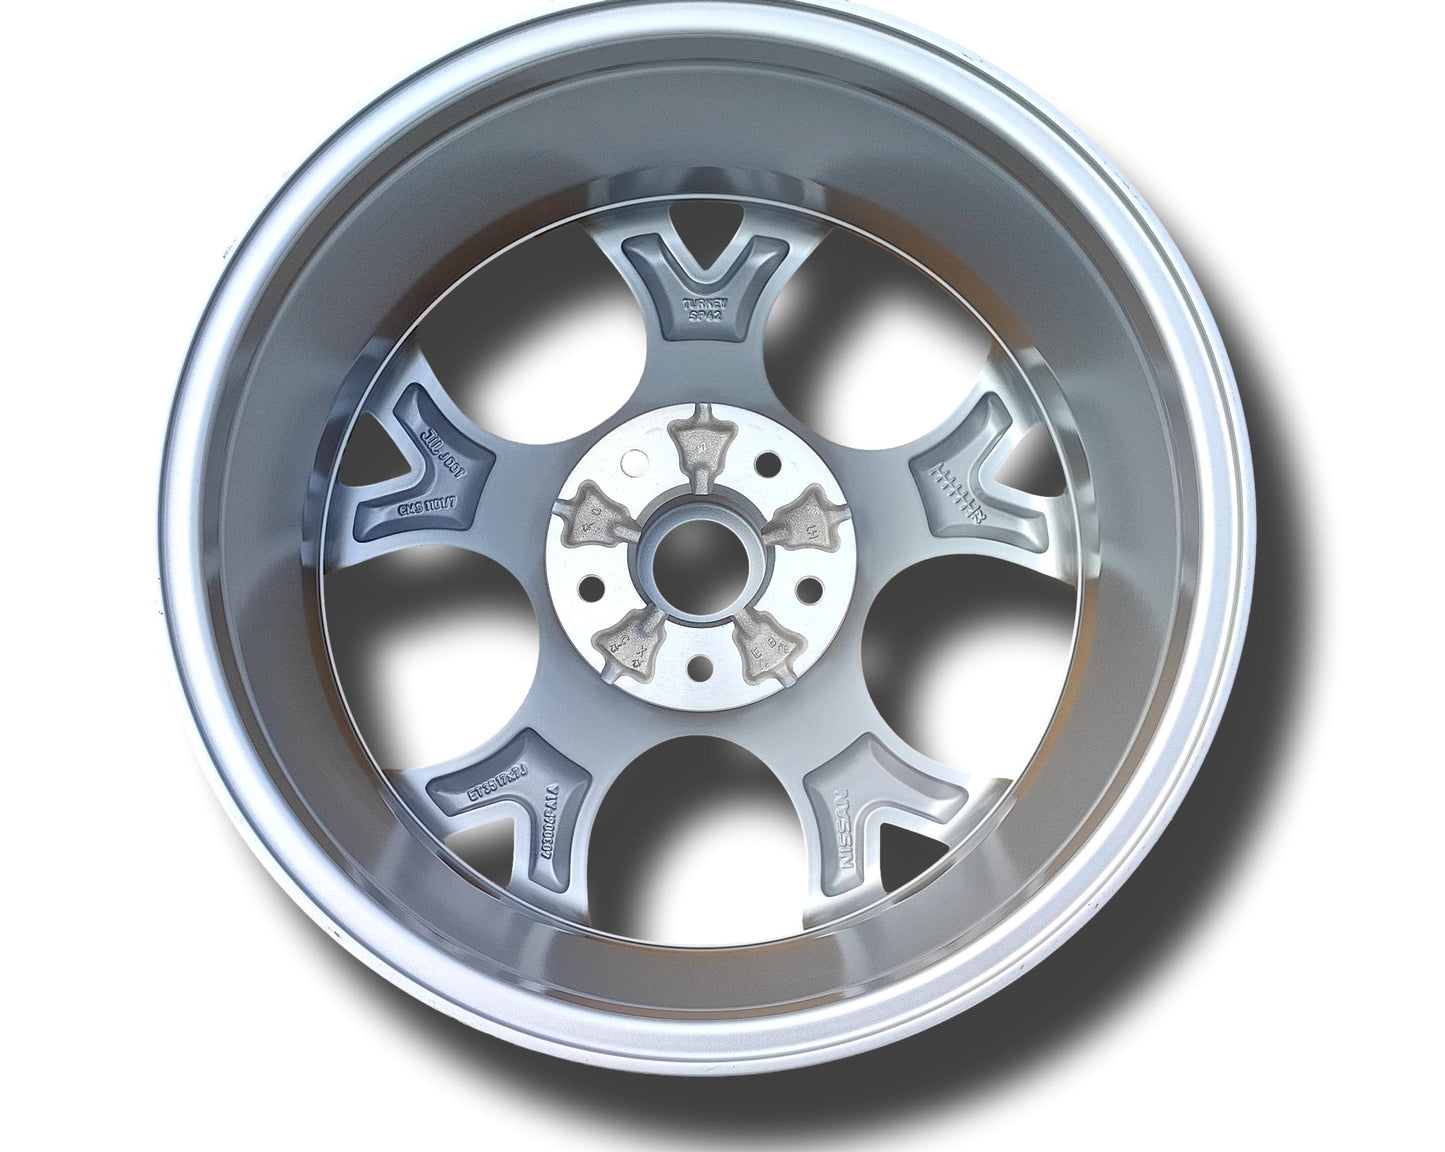 New 17" Silver Alloy Wheel 7J 35 off Set of 4